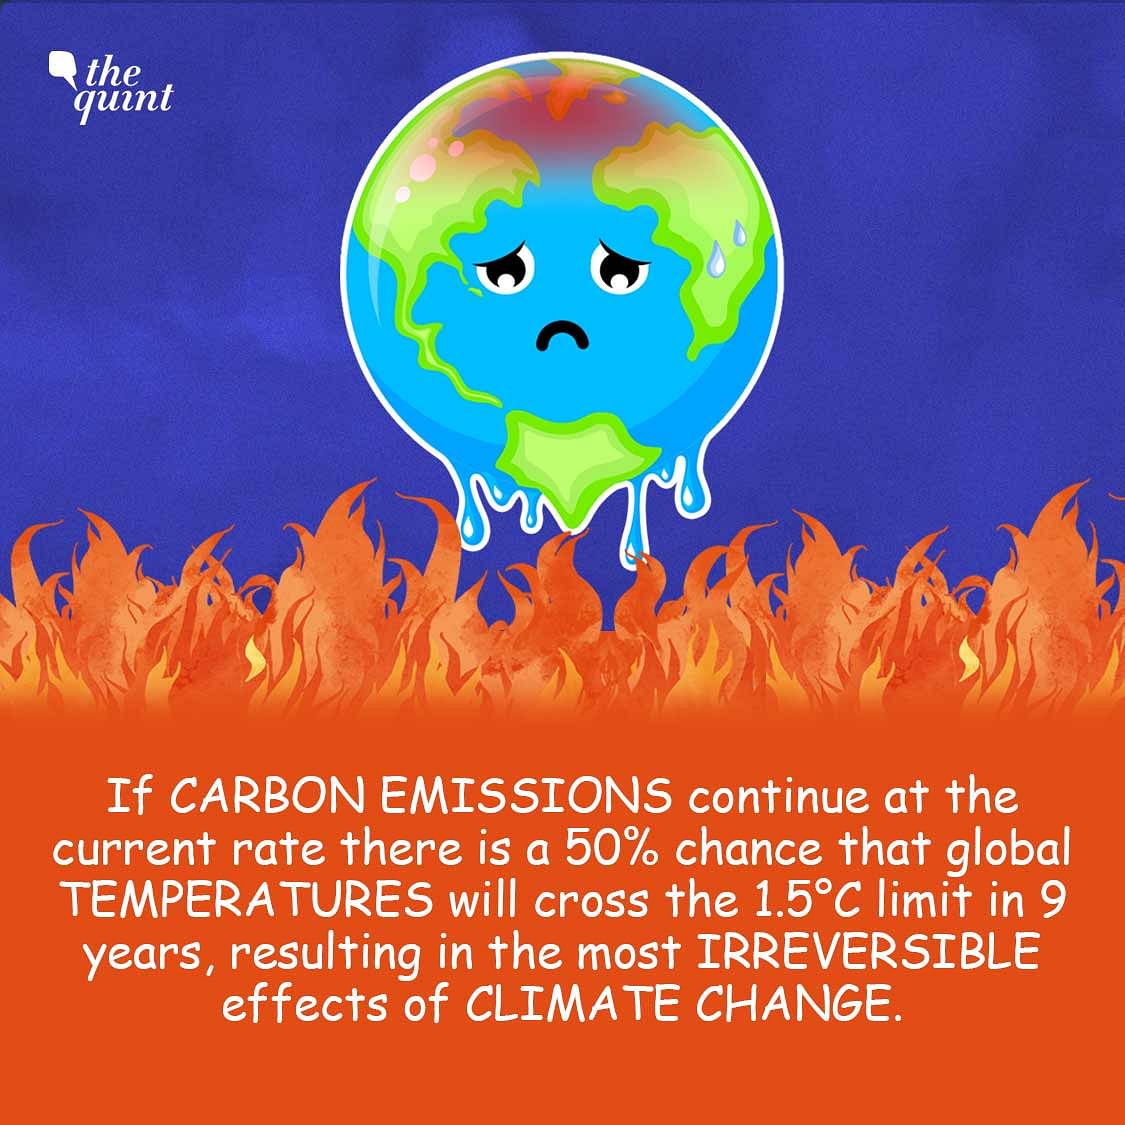 The Global Carbon Budget 2022 has stated that global carbon emissions (CO2) in 2022 are at record levels.